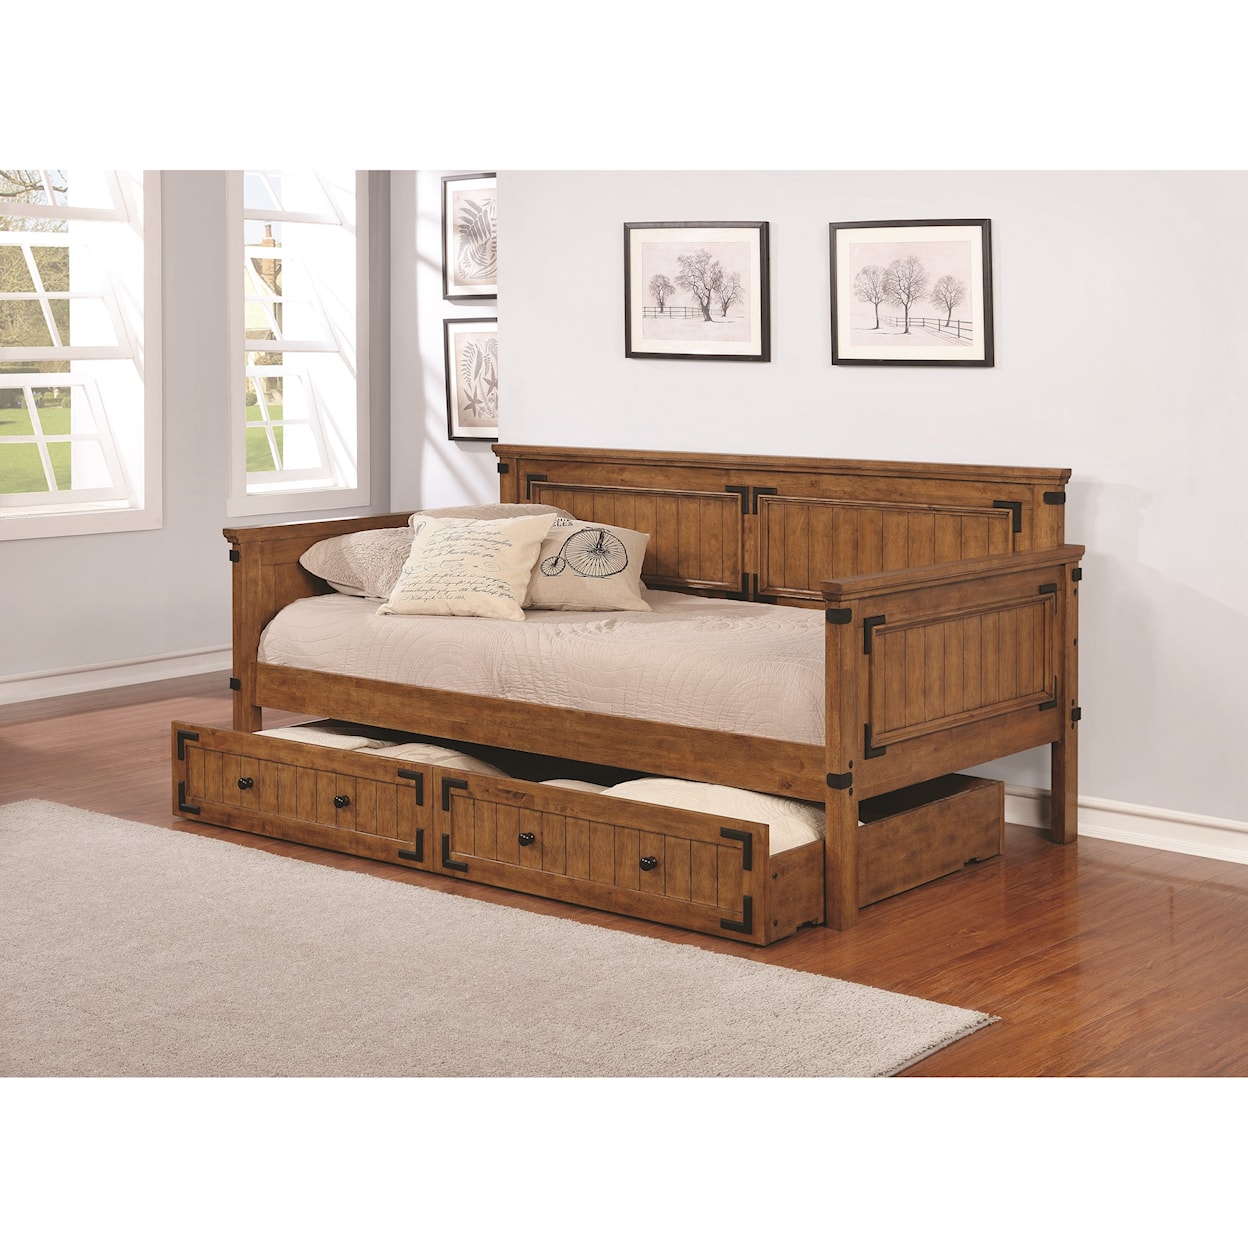 Michael Alan CSR Select Daybeds by Coaster Daybed with Trundle